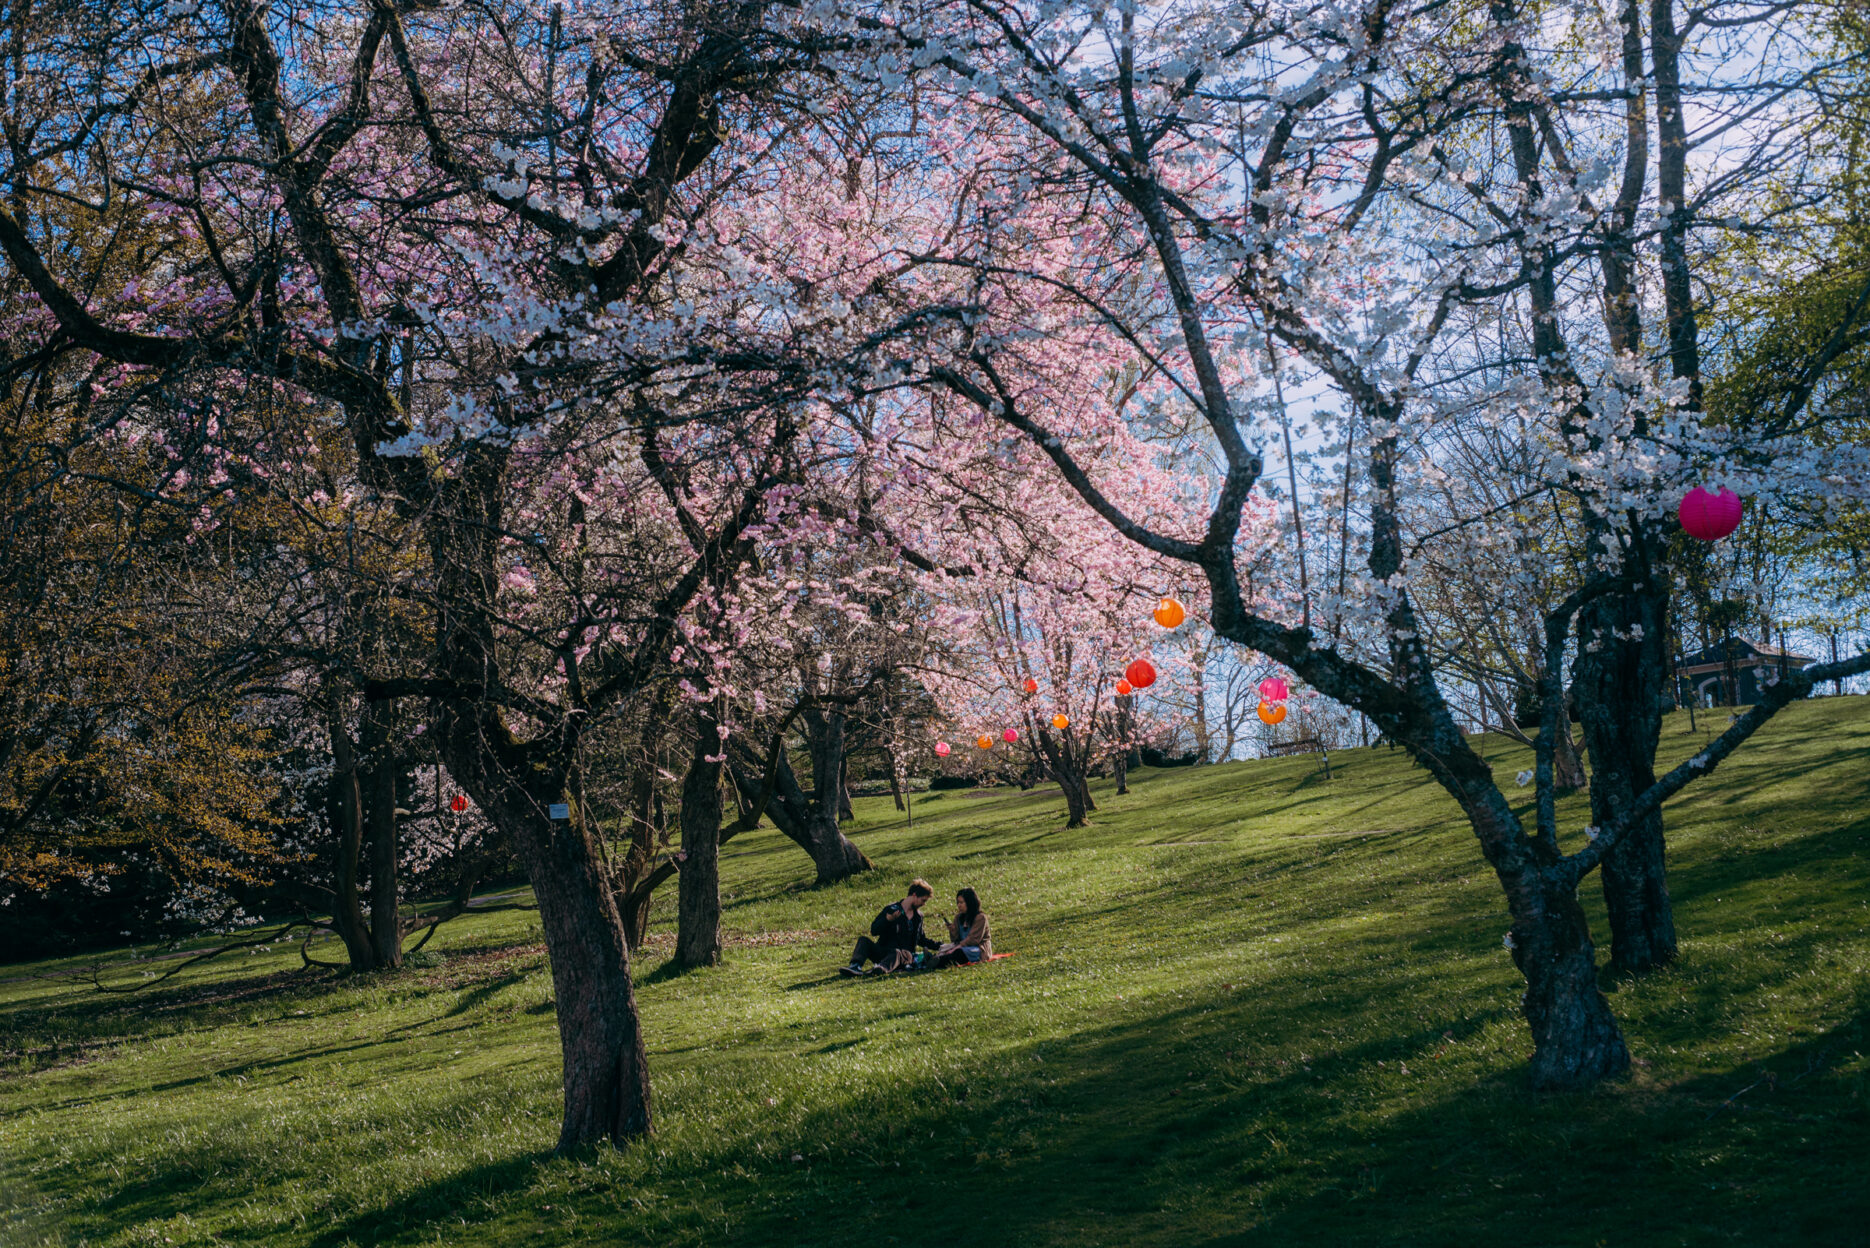 Couple having a picnic between blossoming trees